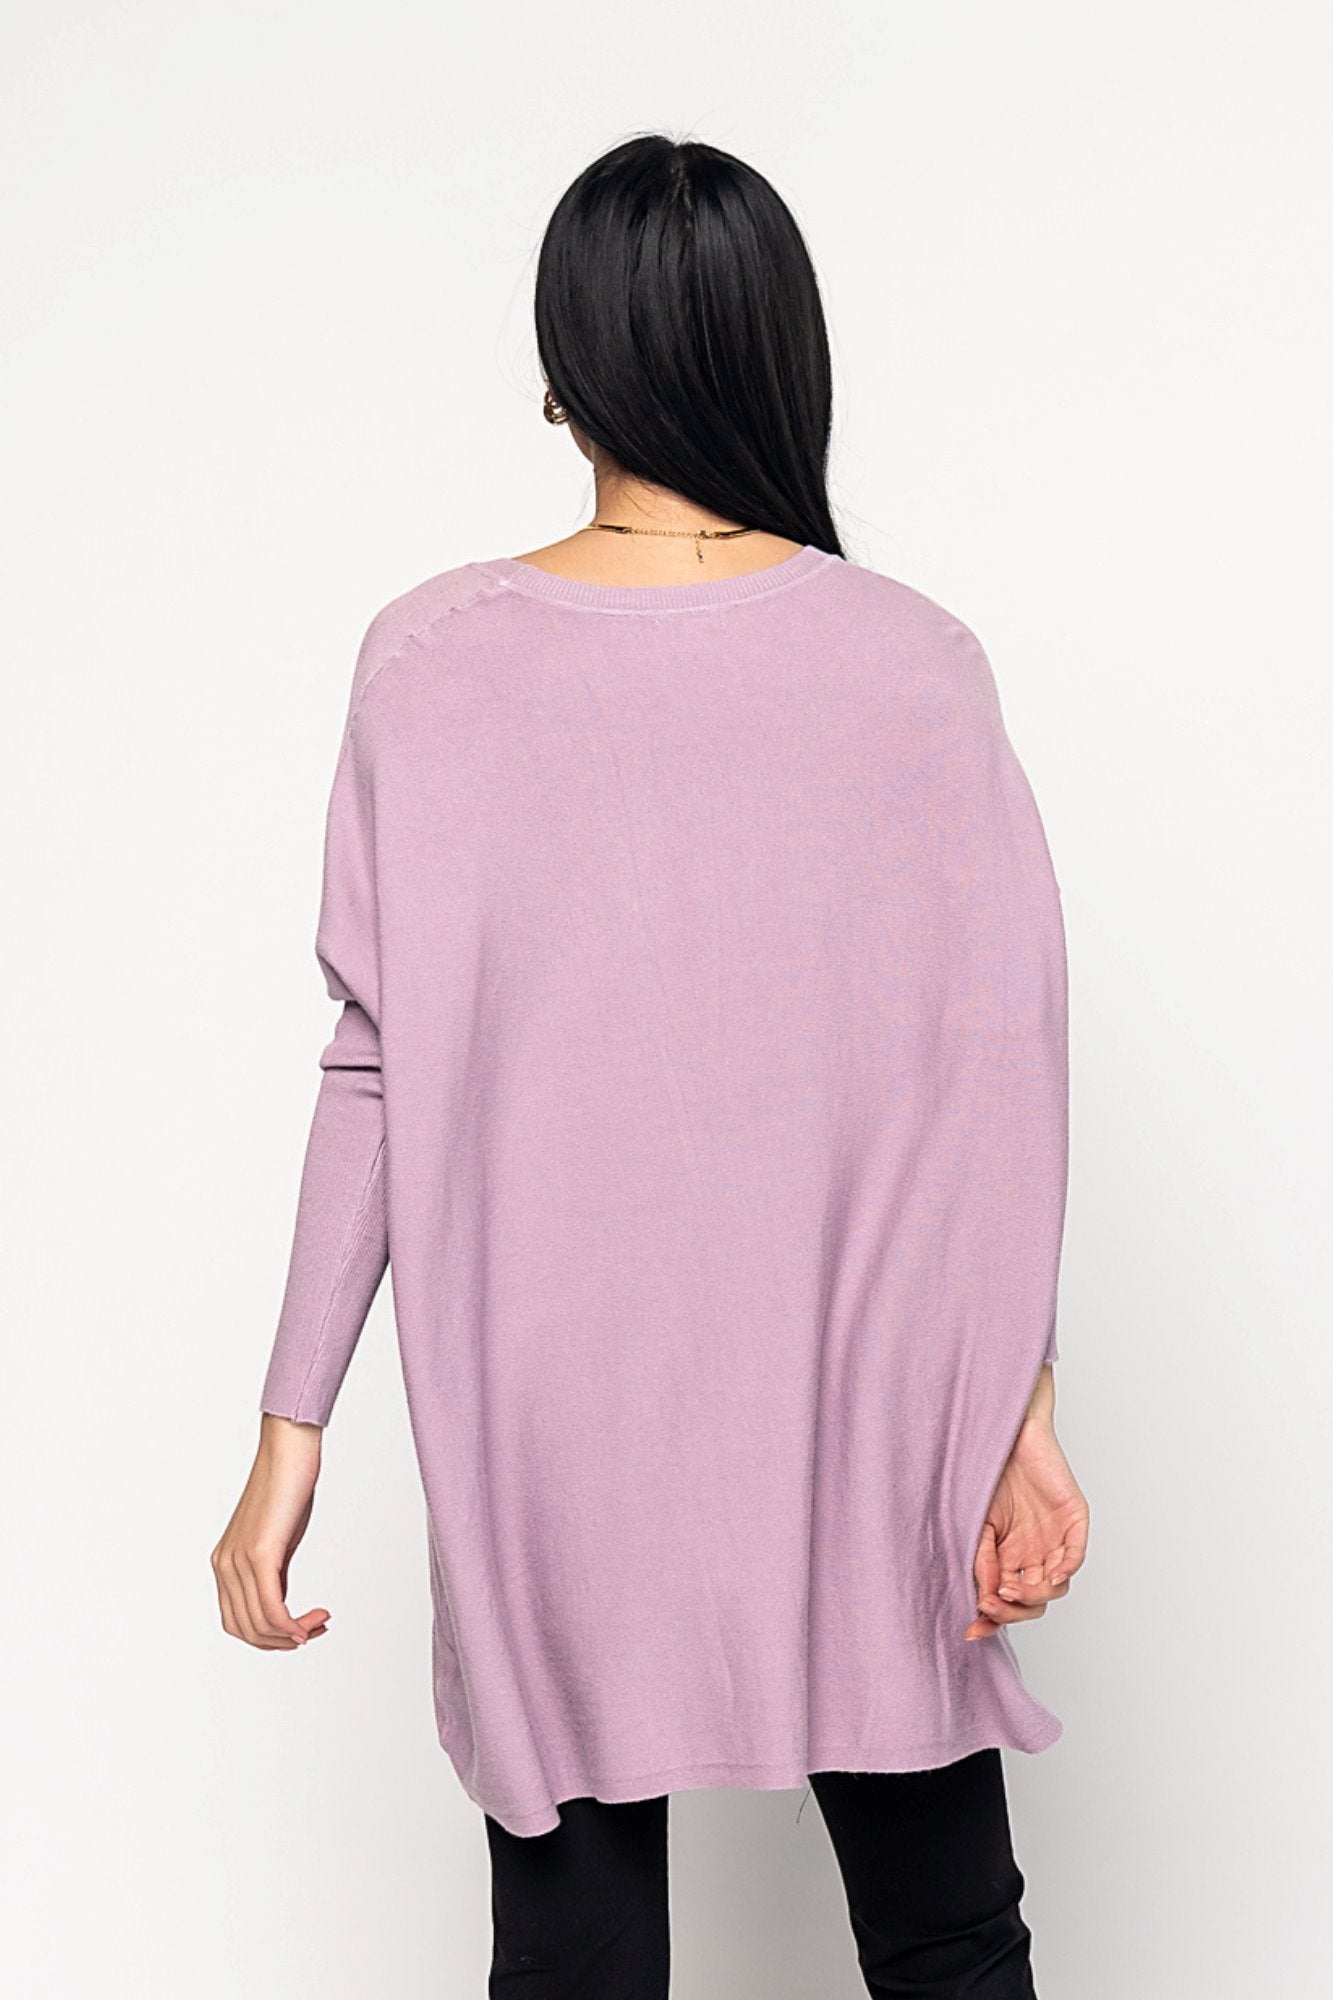 Griffin Sweater in Lavender Holley Girl 